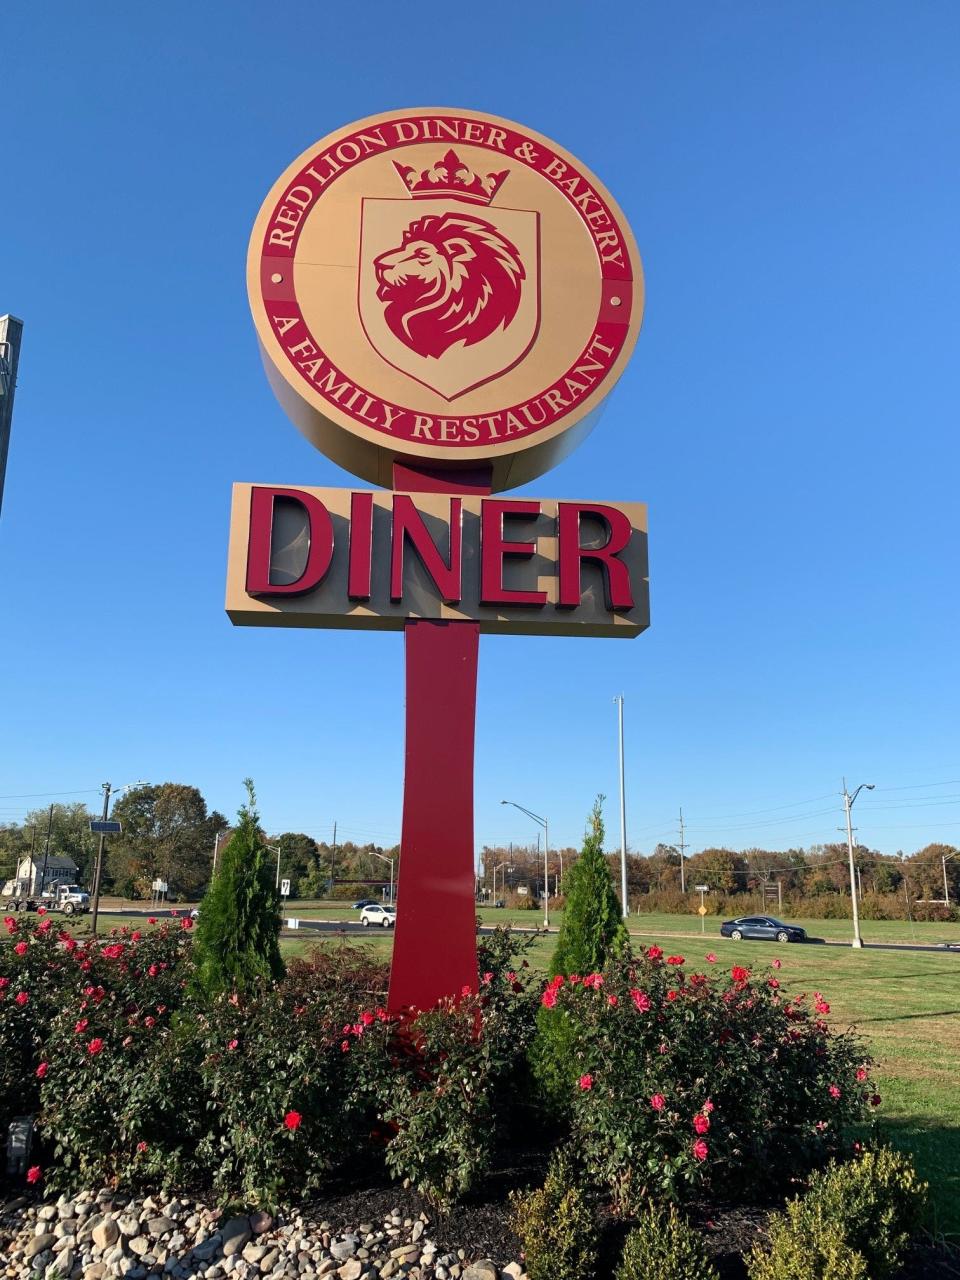 Red Lion Diner shares a Leo the Lion logo with Monarch Diner in Glassboro. Red Lion Diner has closed permanently.